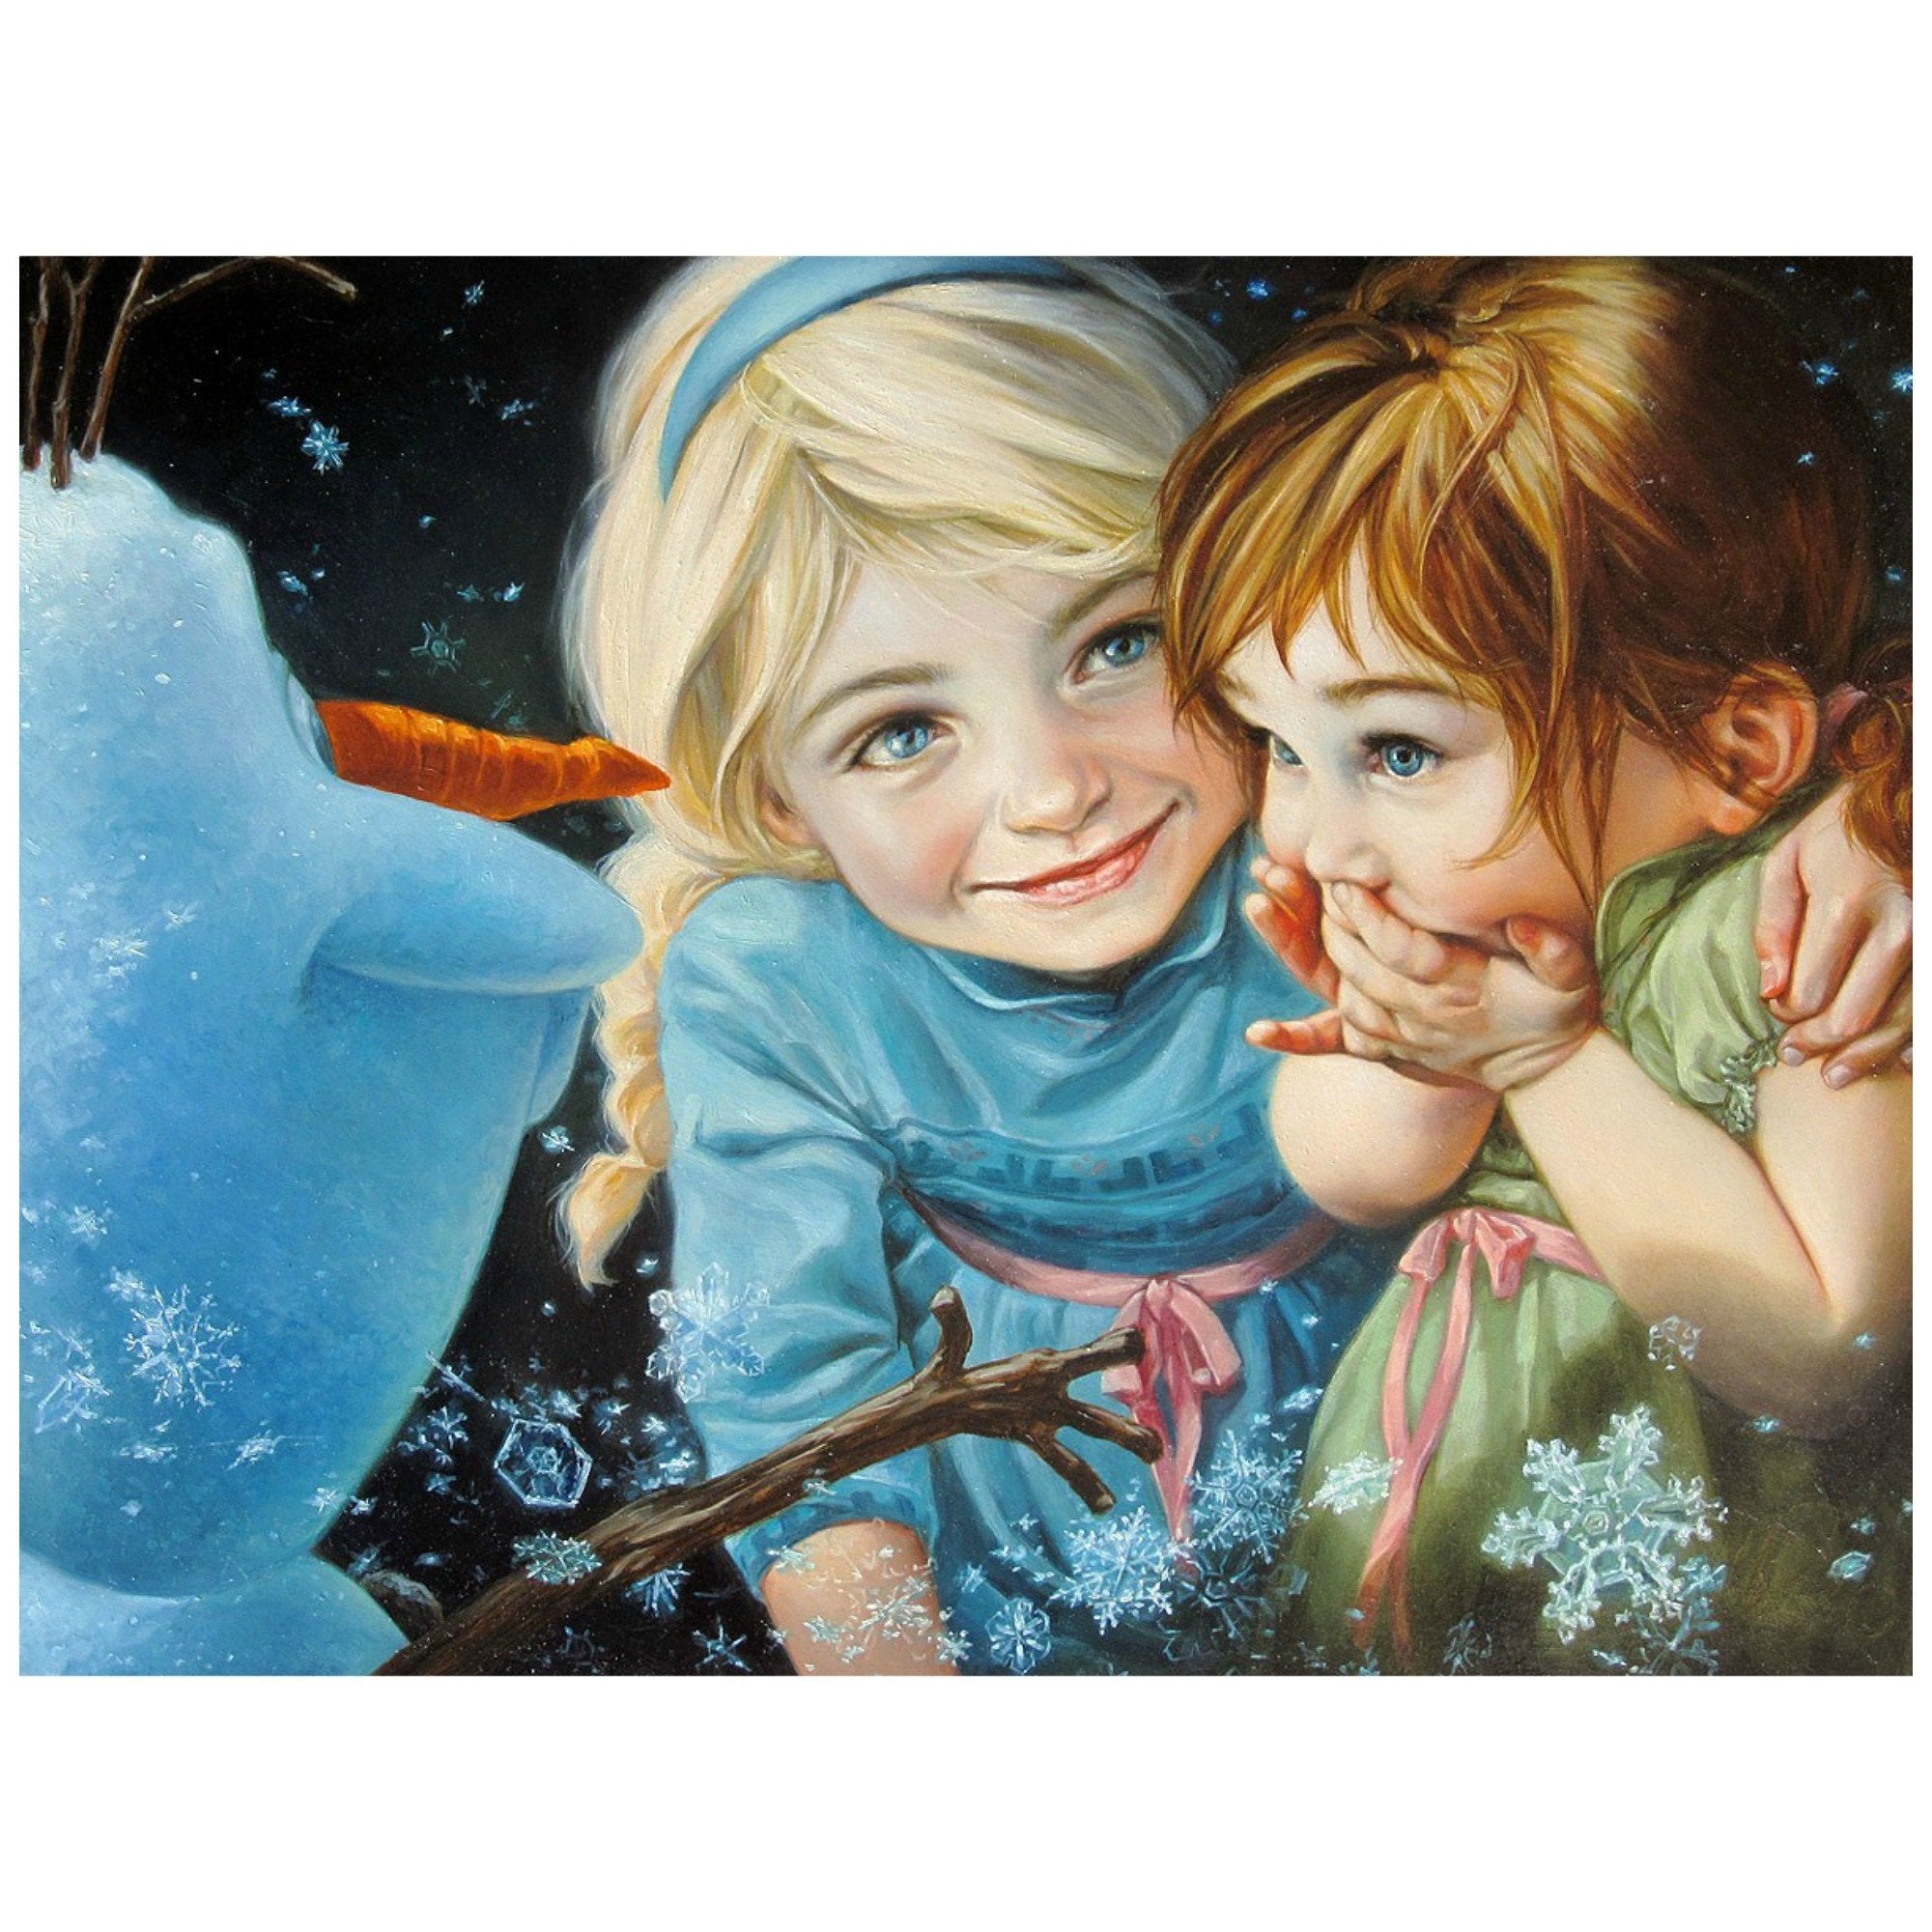 Elsa and Anna as little girls, as Elsa introduces Olaf the snowman to Anna.  Inspired by Walt Disney's Animated Movie Film - Frozen